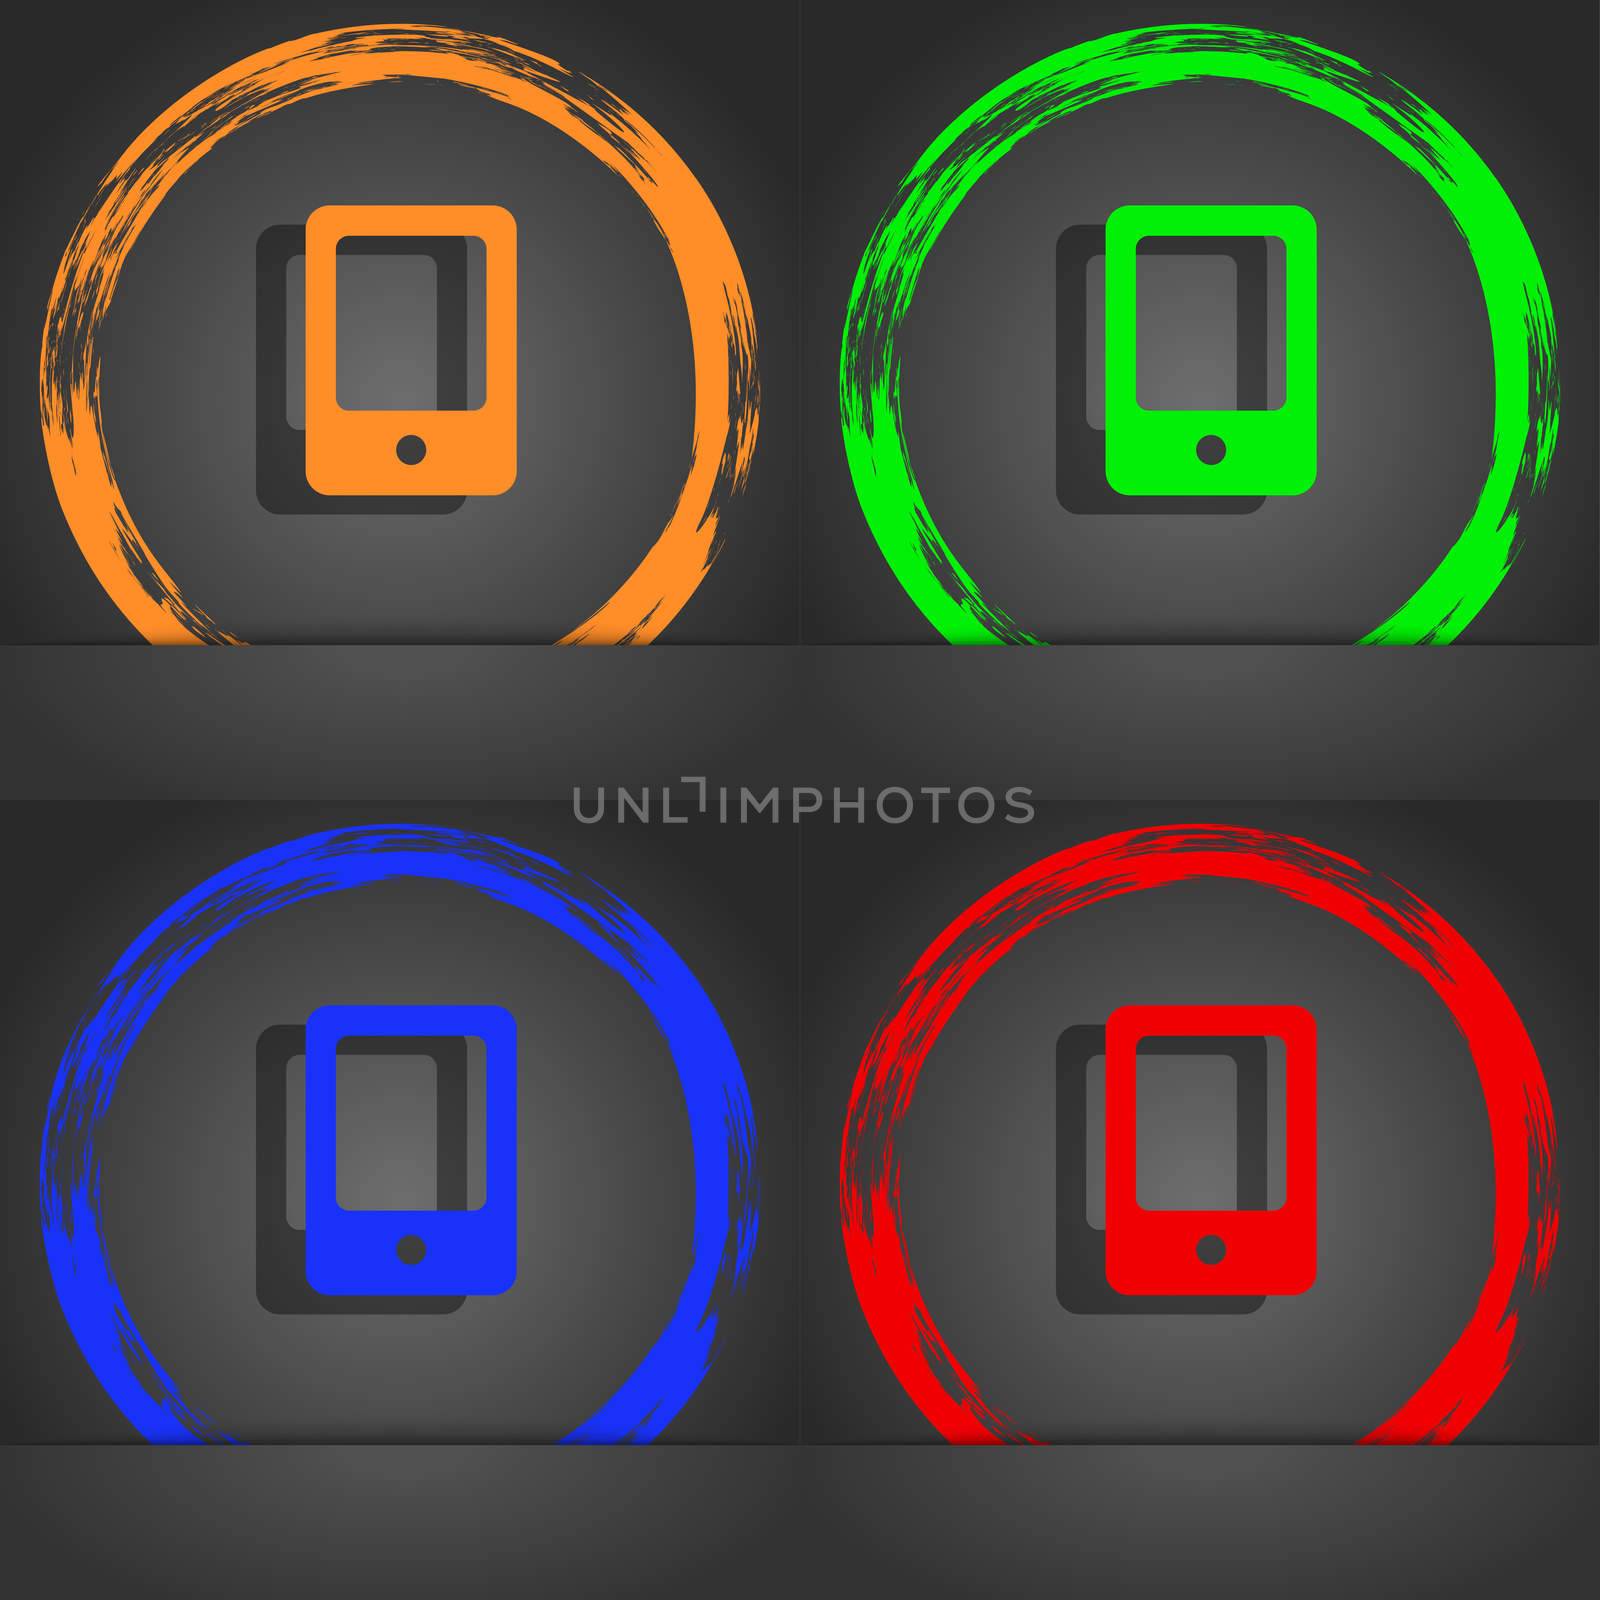 Tablet icon symbol. Fashionable modern style. In the orange, green, blue, green design. illustration